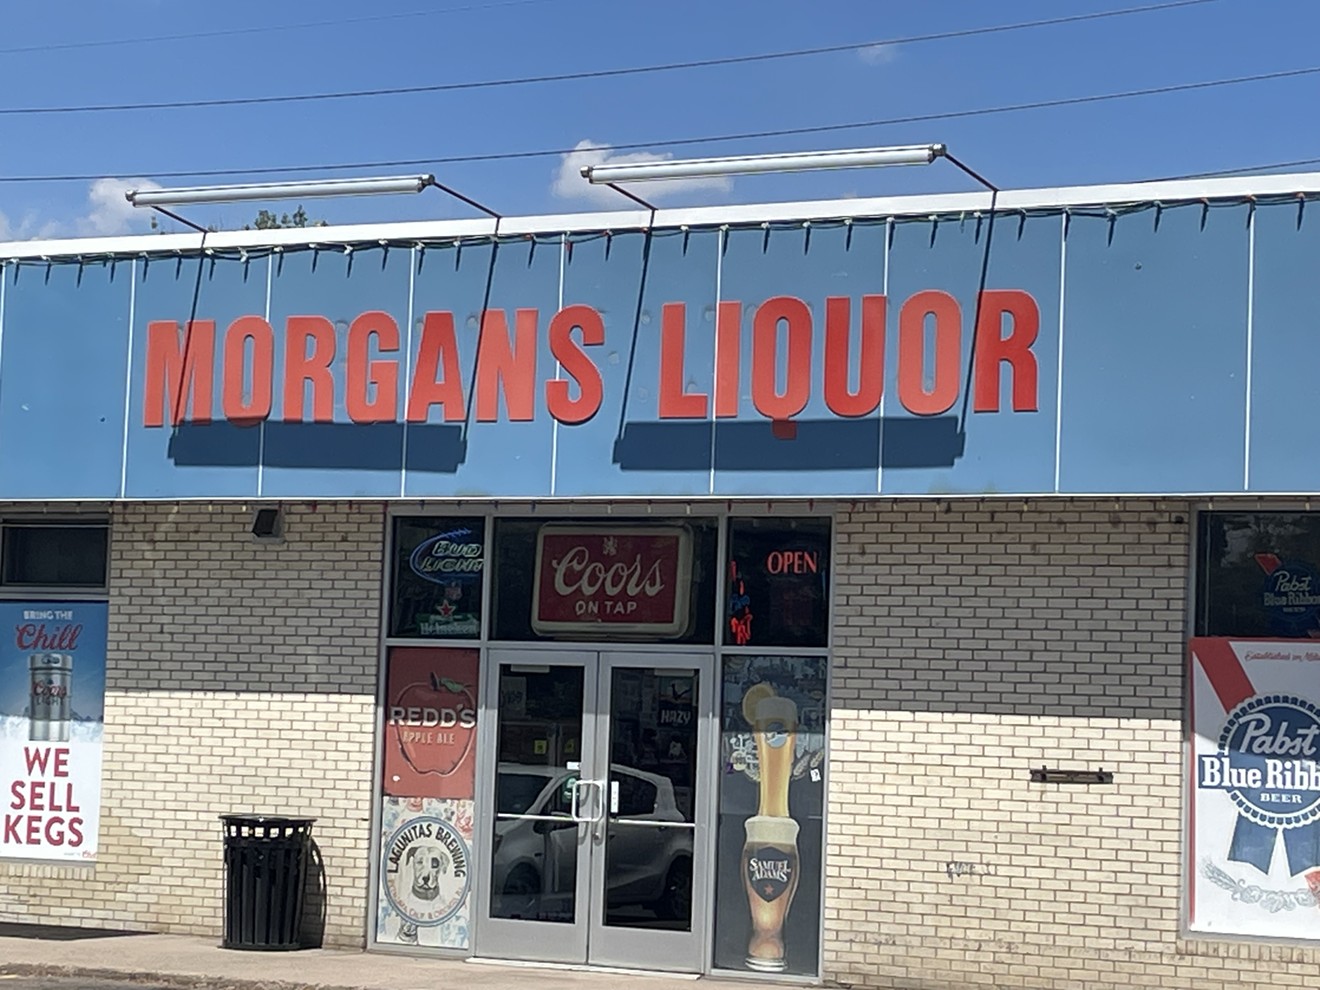 Morgan's Liquor is located in the same parking lot as a Safeway.